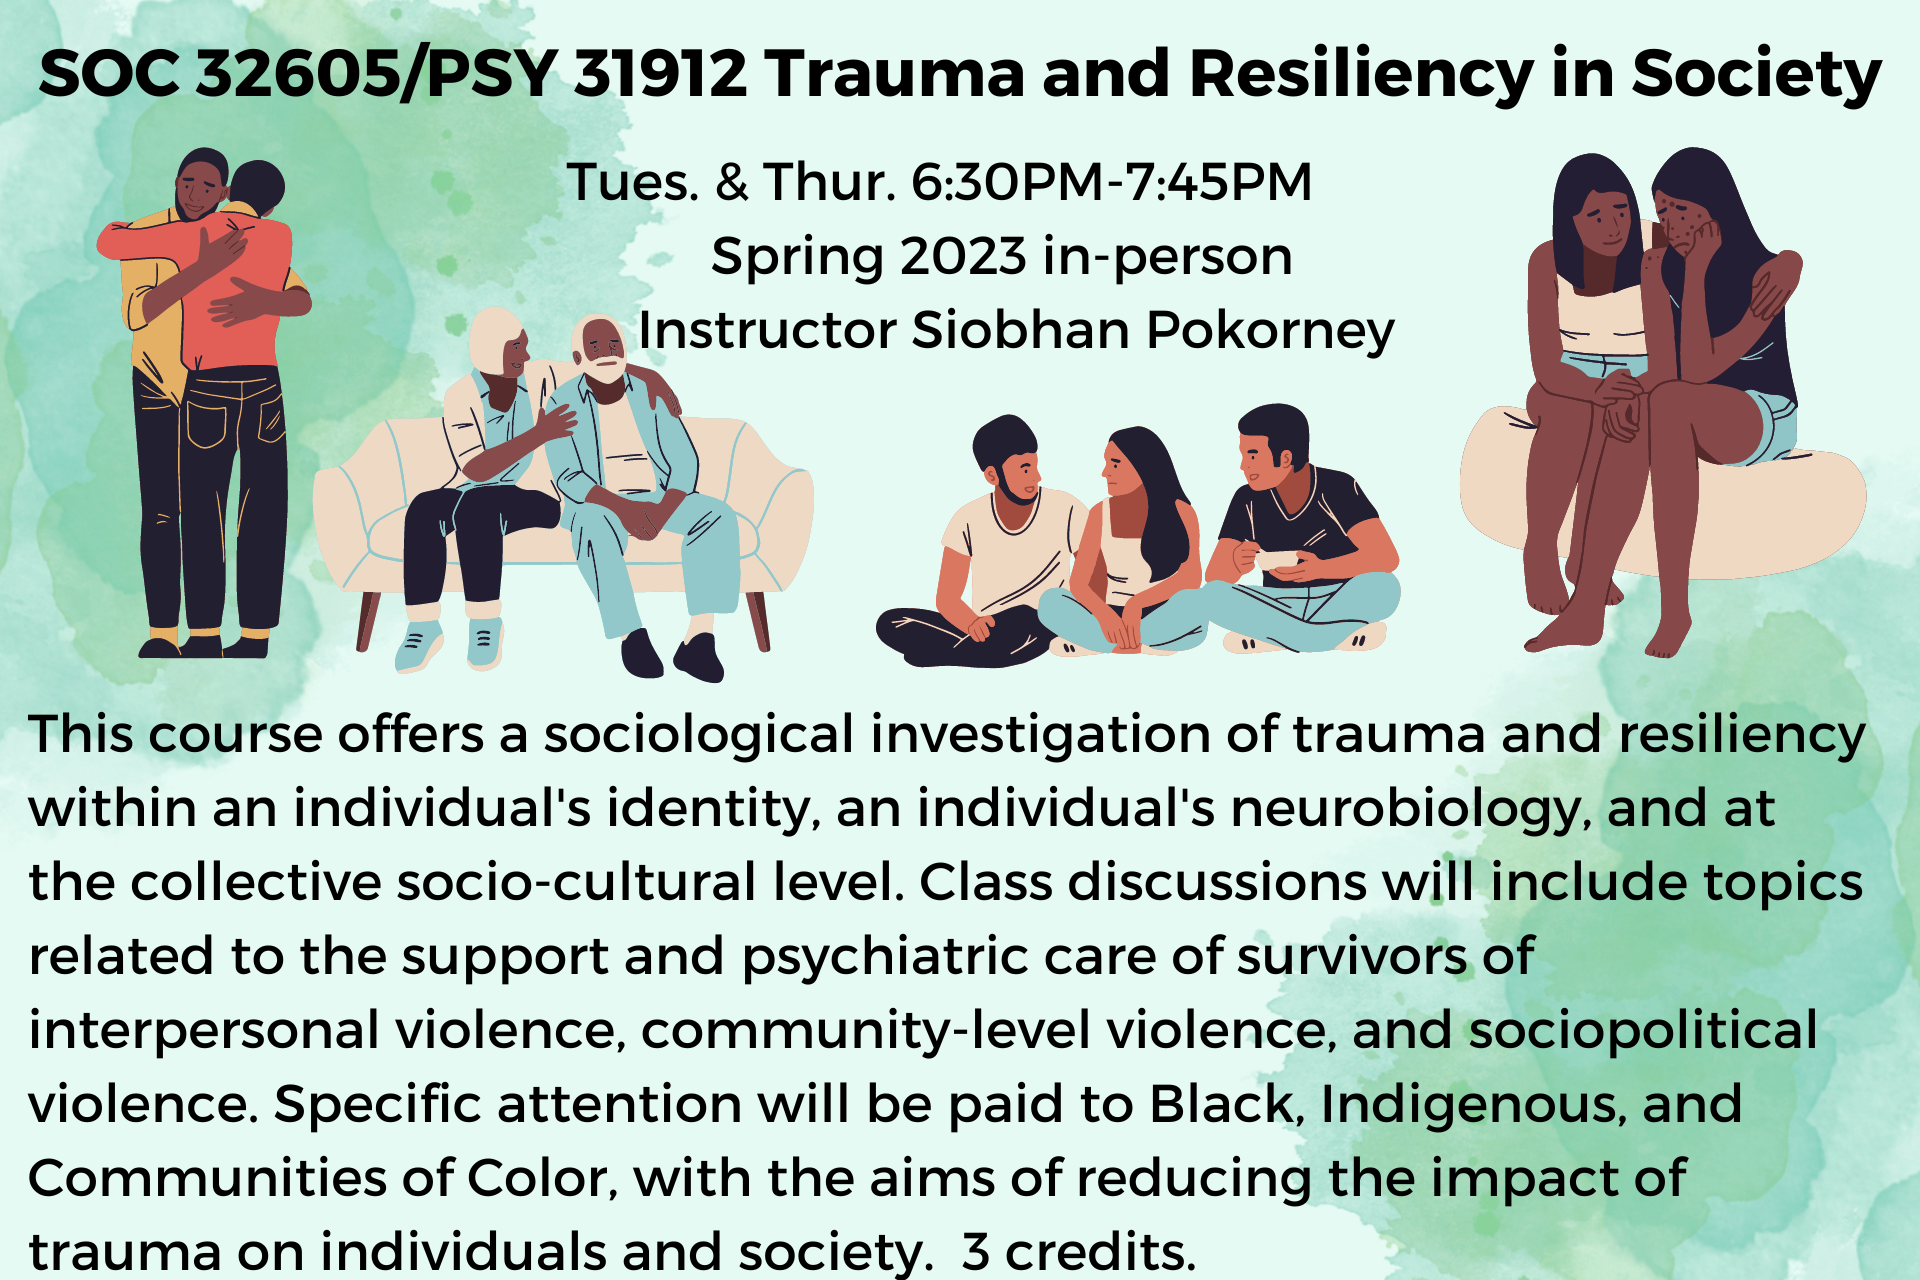 ColinPowellSchool CCNY Sociology Trauma and Resiliency in Society Spring 2023 Course